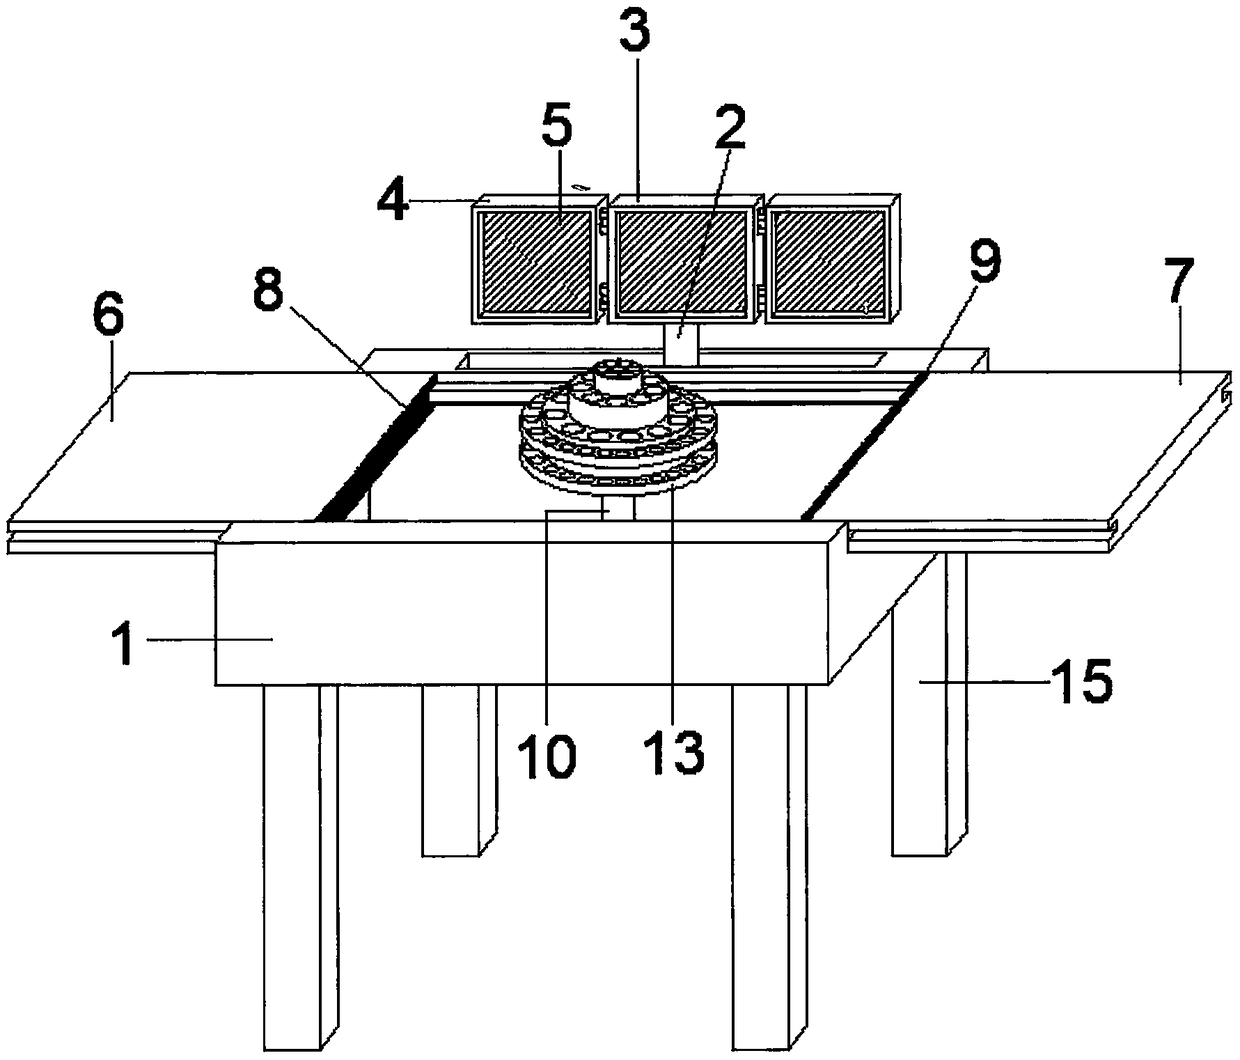 An opening and closing type dresser allowing multi-angle make-up